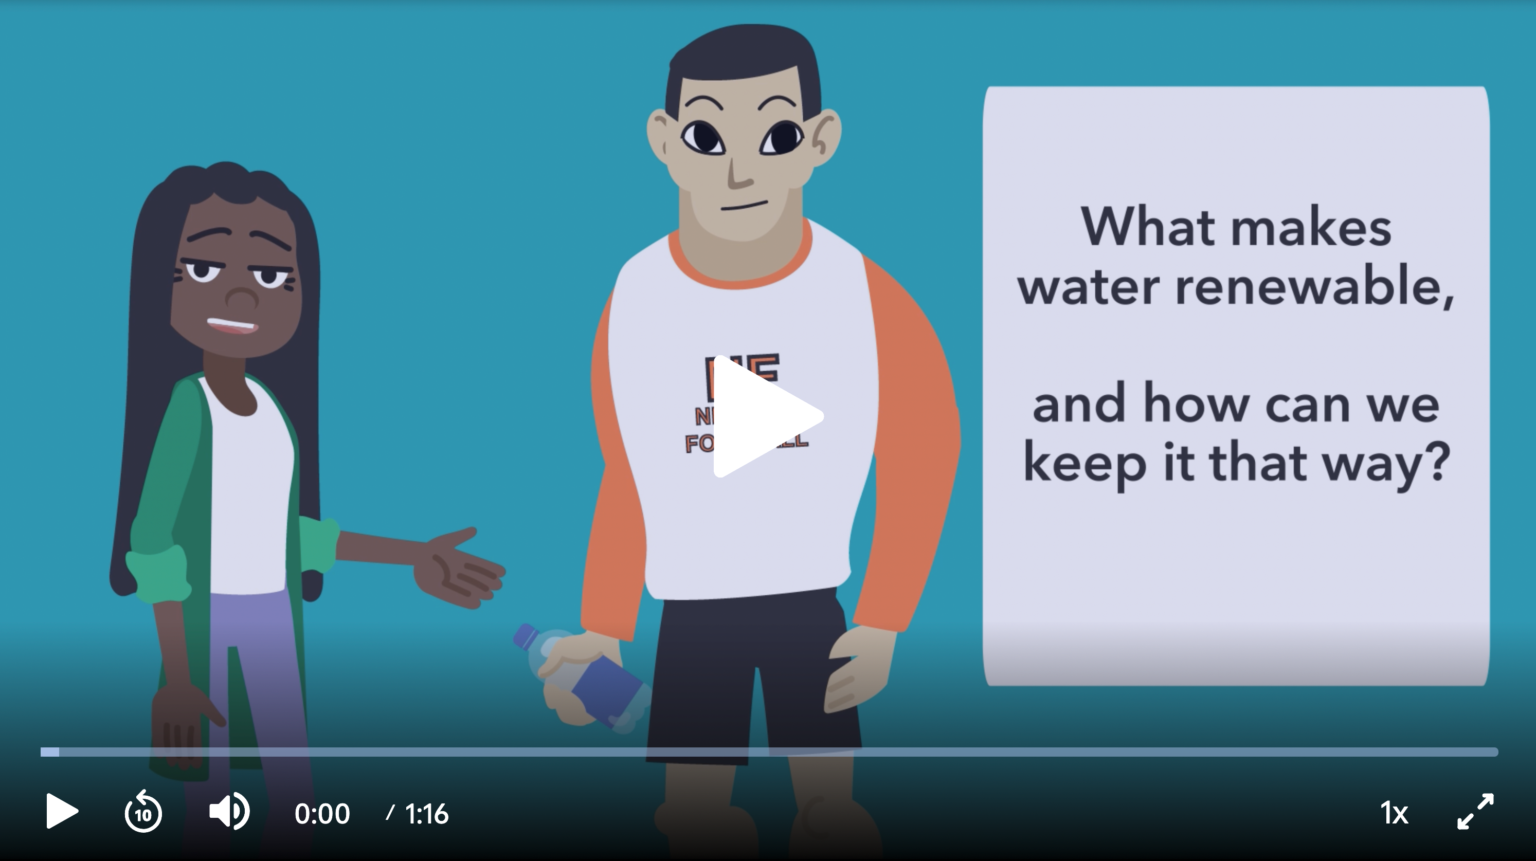 A screenshot showing a cartoon animation of two students talking. Off to the right side, large text states, "What makes water renewable, and how can we keep it that way?"